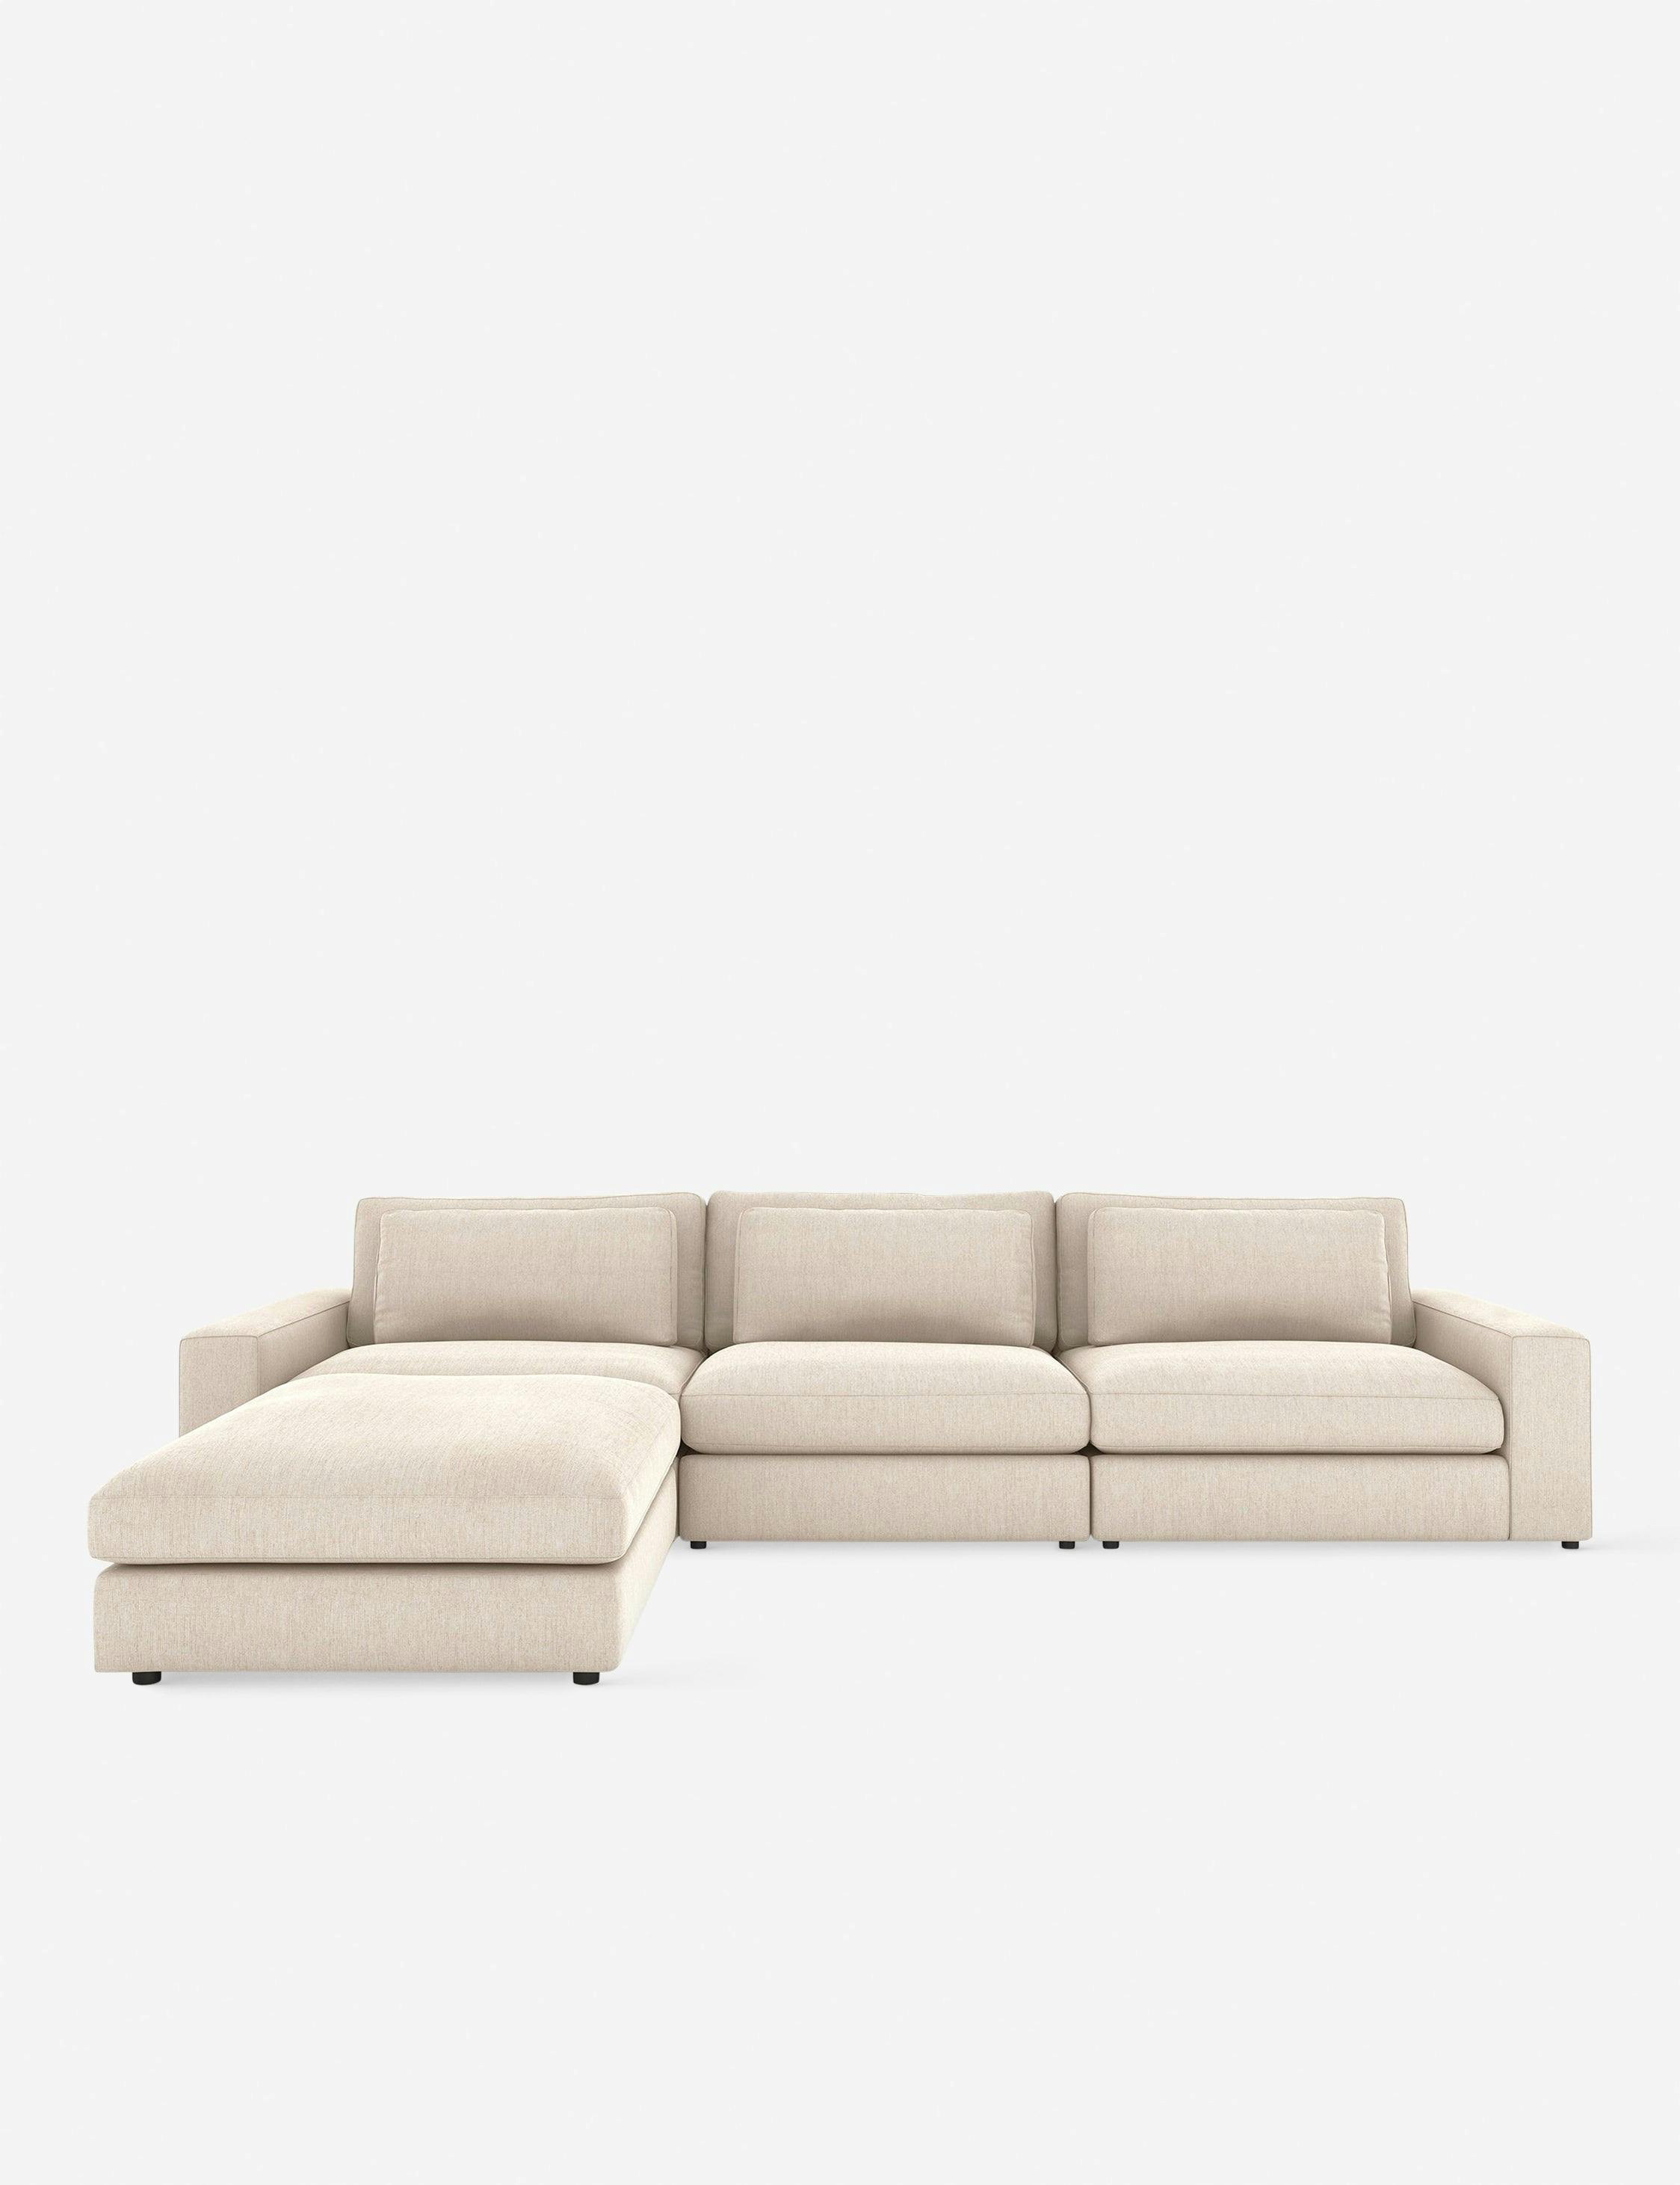 Cresswell Off White Sectional Sofa